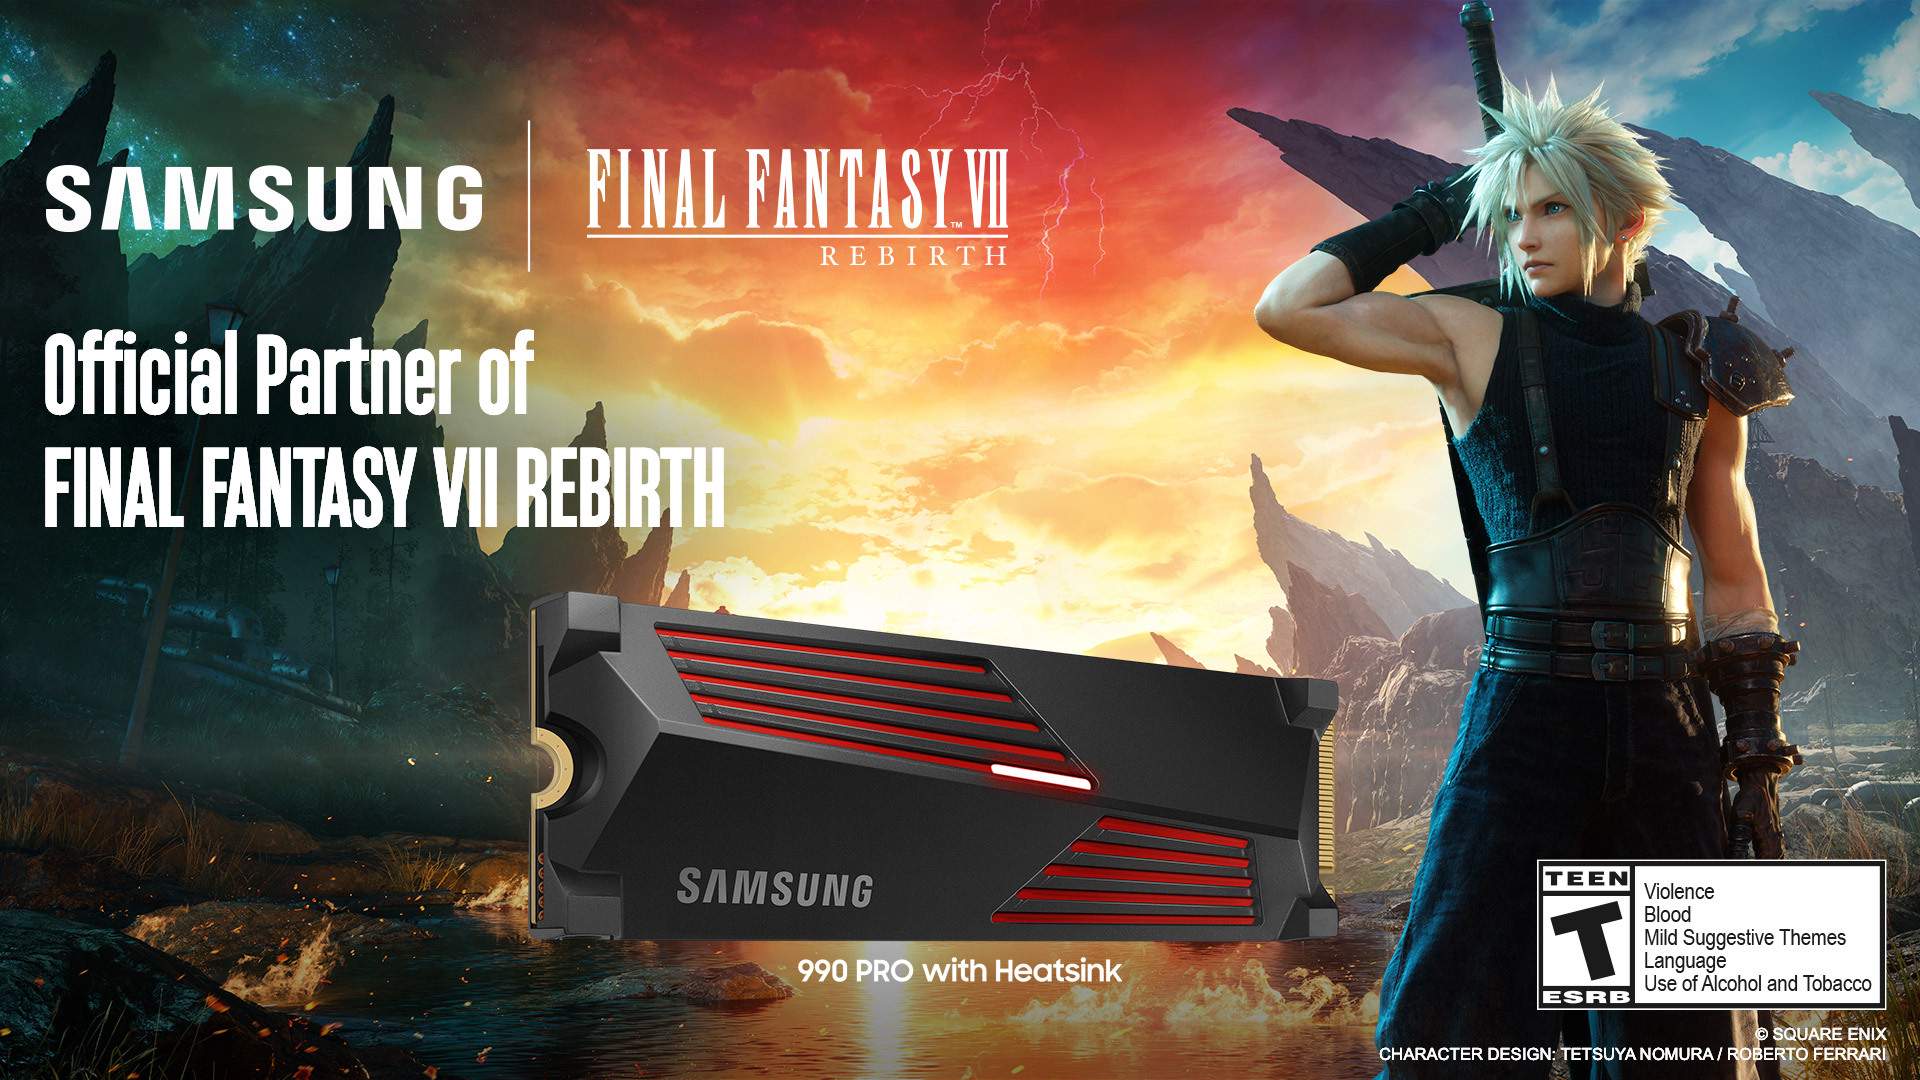 Cloud Strife standing next to Samsung SSD 